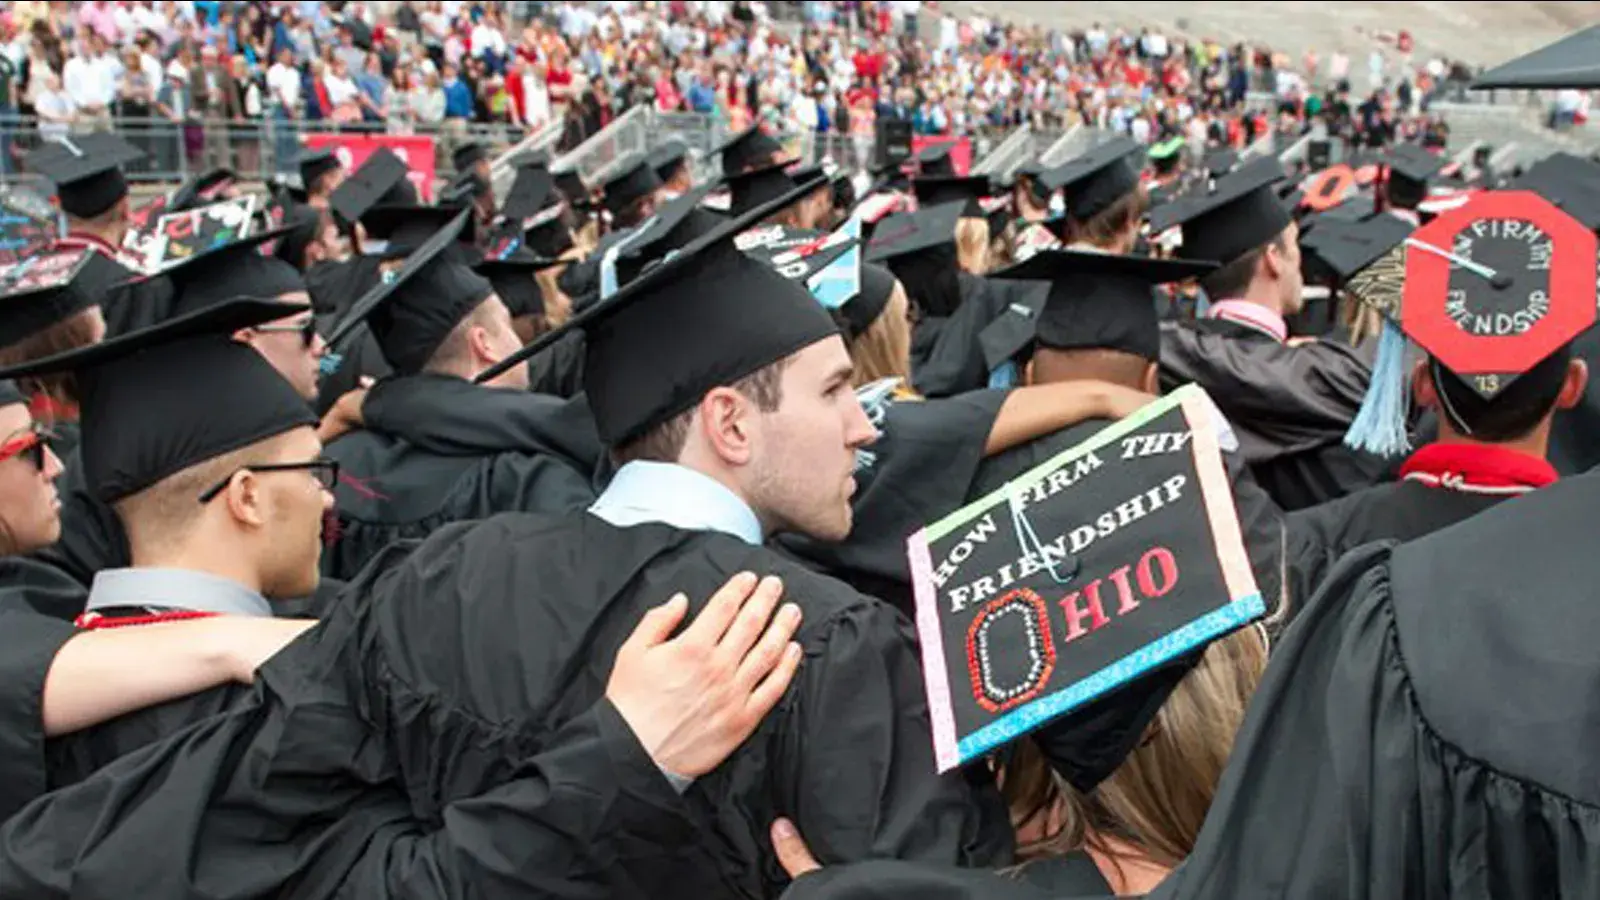 Students swaying arm in arm during graduation in the Shoe